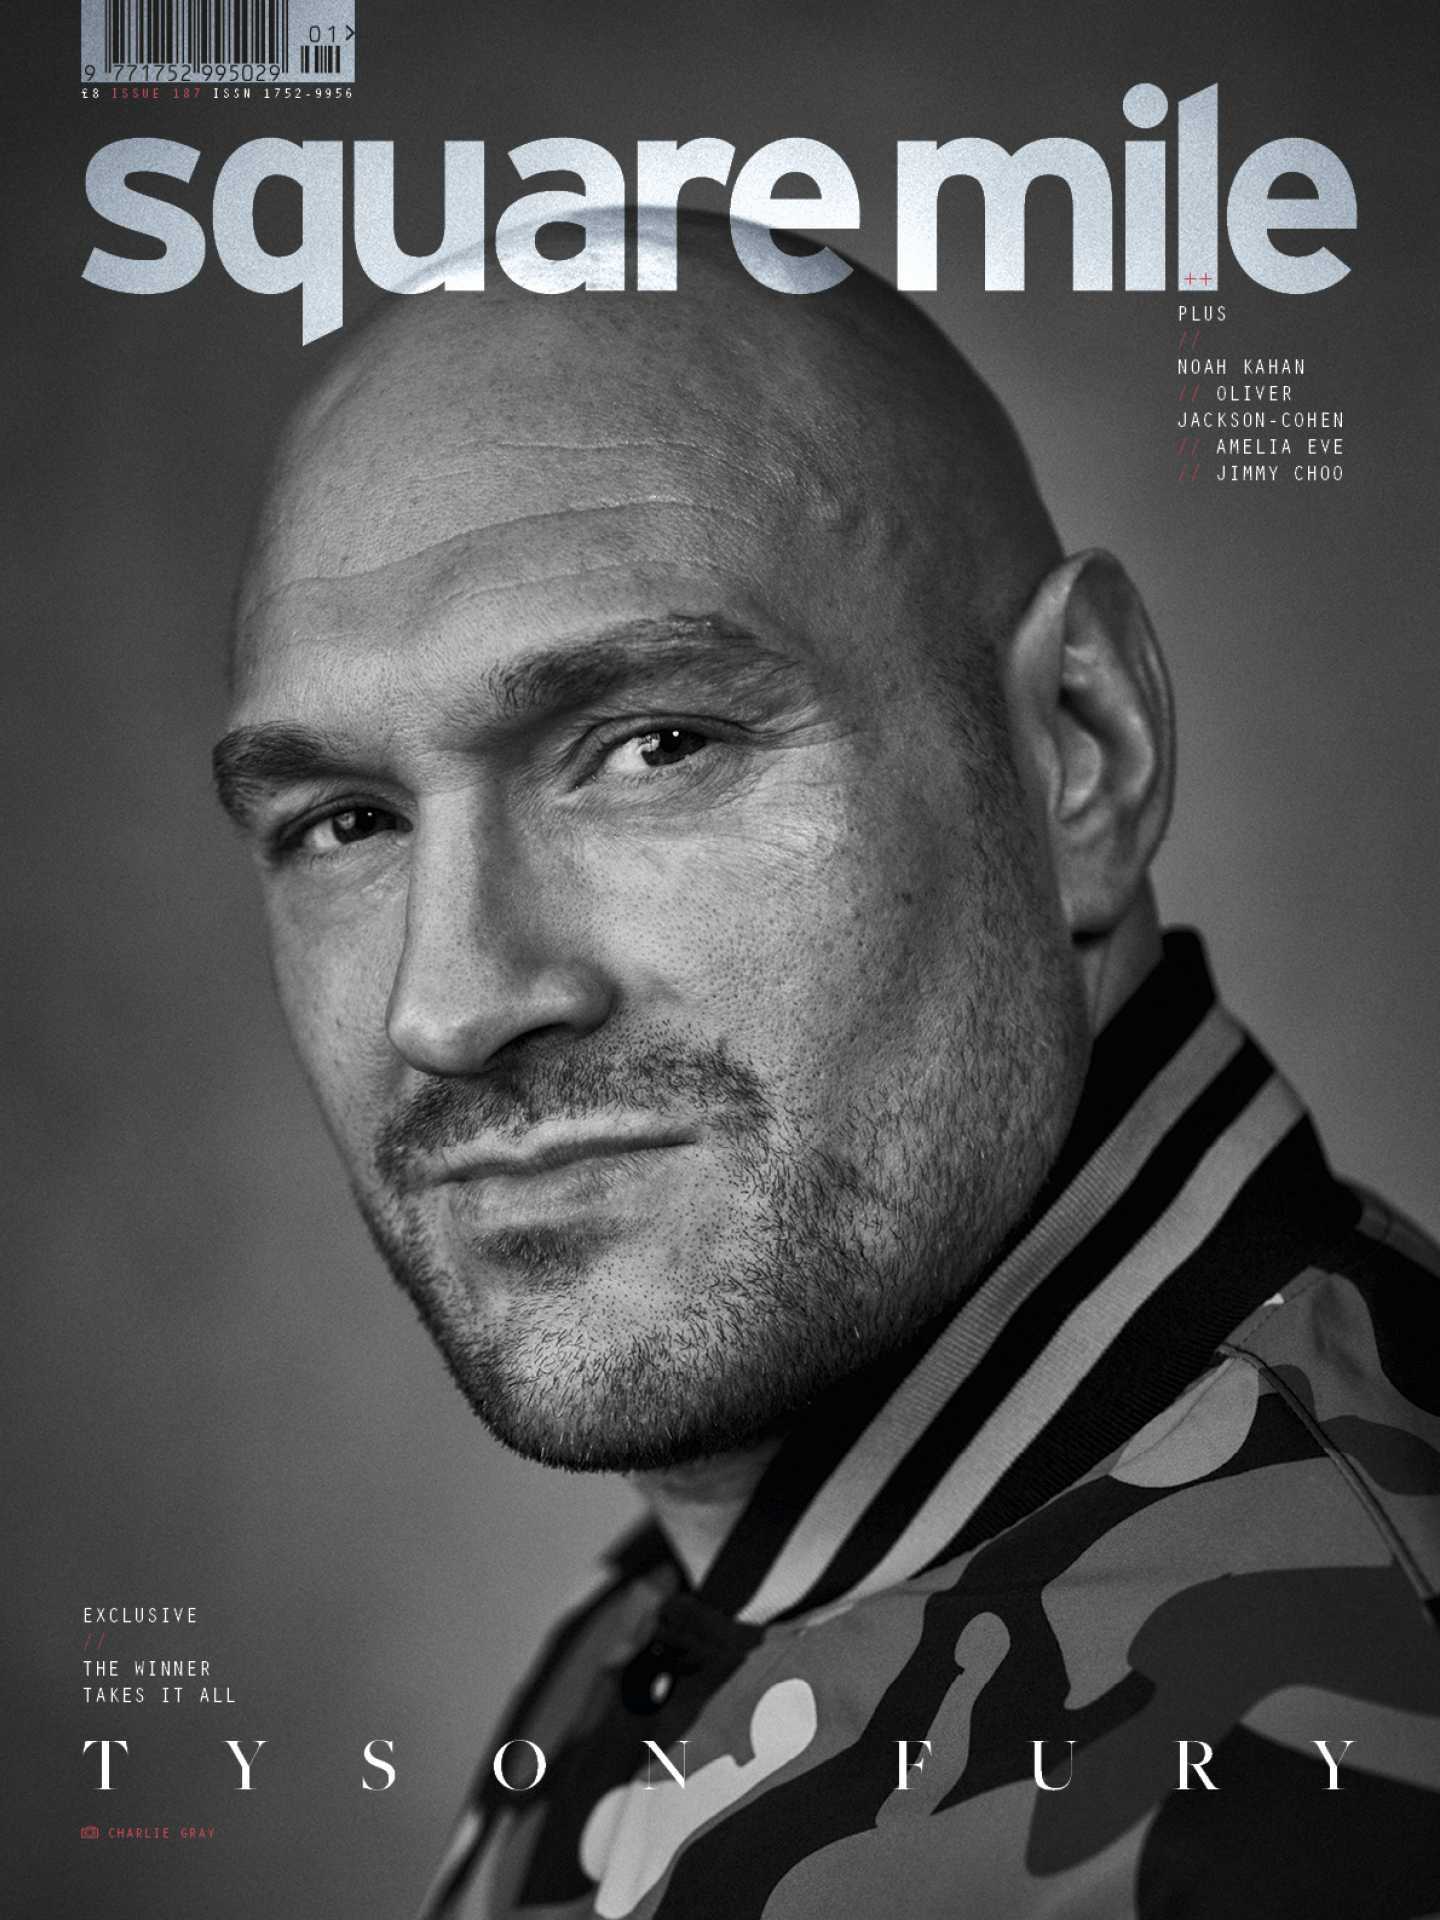 Tyson Fury photographed by Charlie Gray for Square Mile